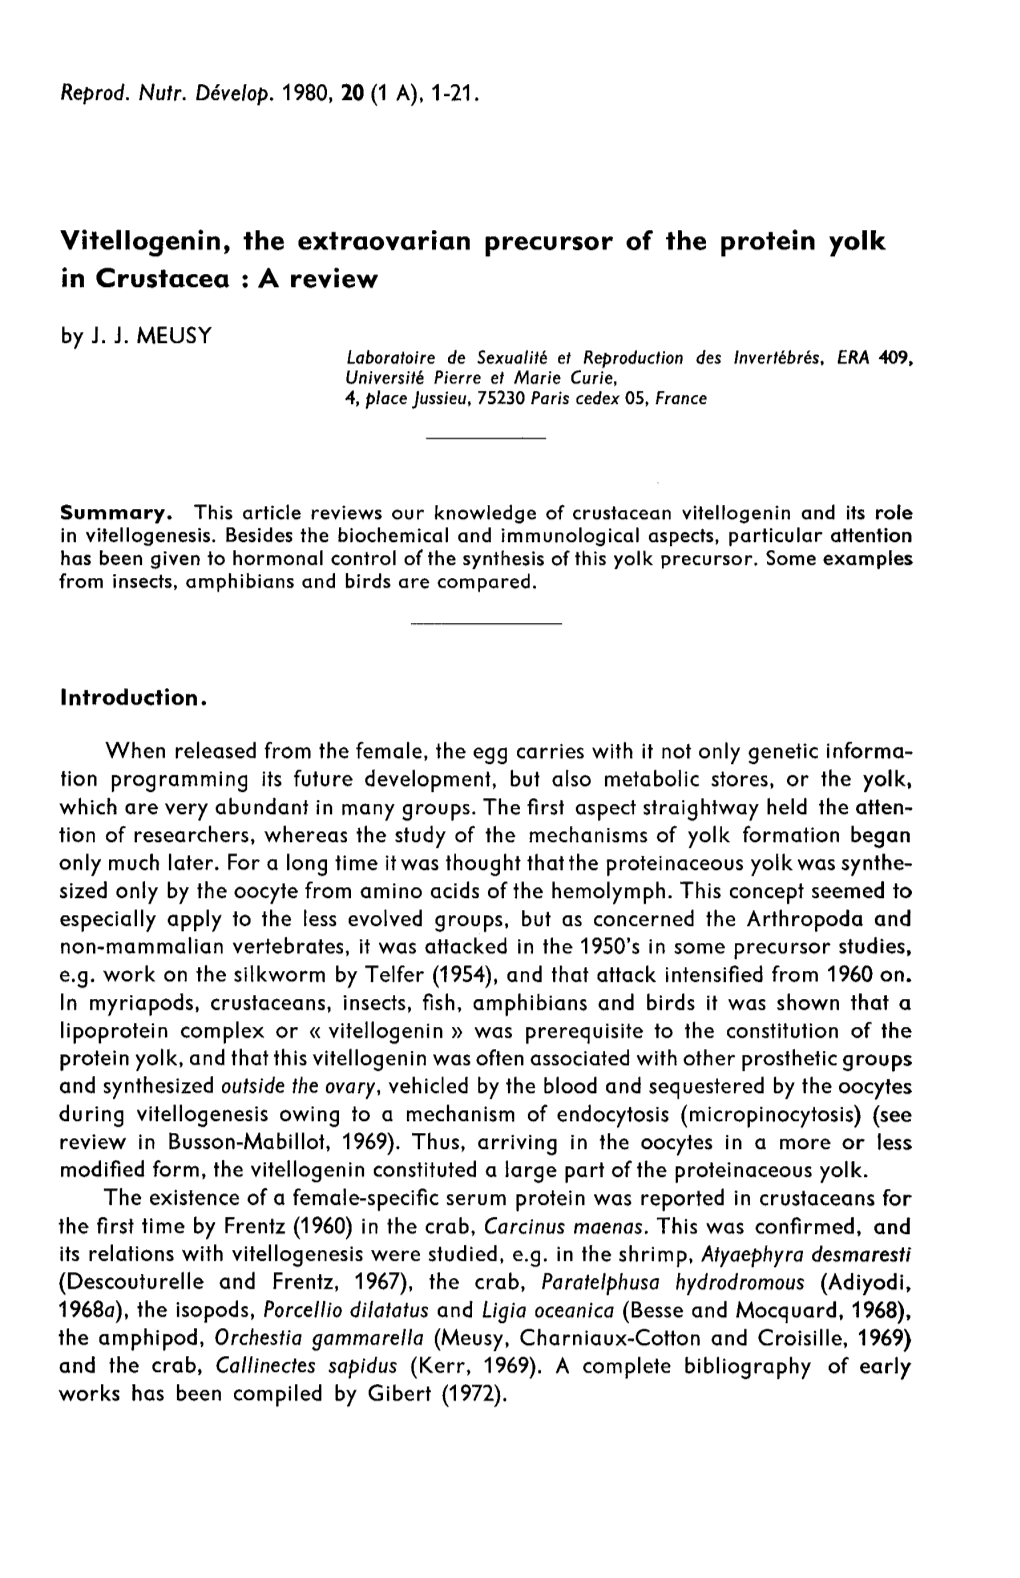 During Vitellogenesis Owing to a Mechanism of Endocytosis (Micropinocytosis) (See Review in Busson-Mabillot, 1969)